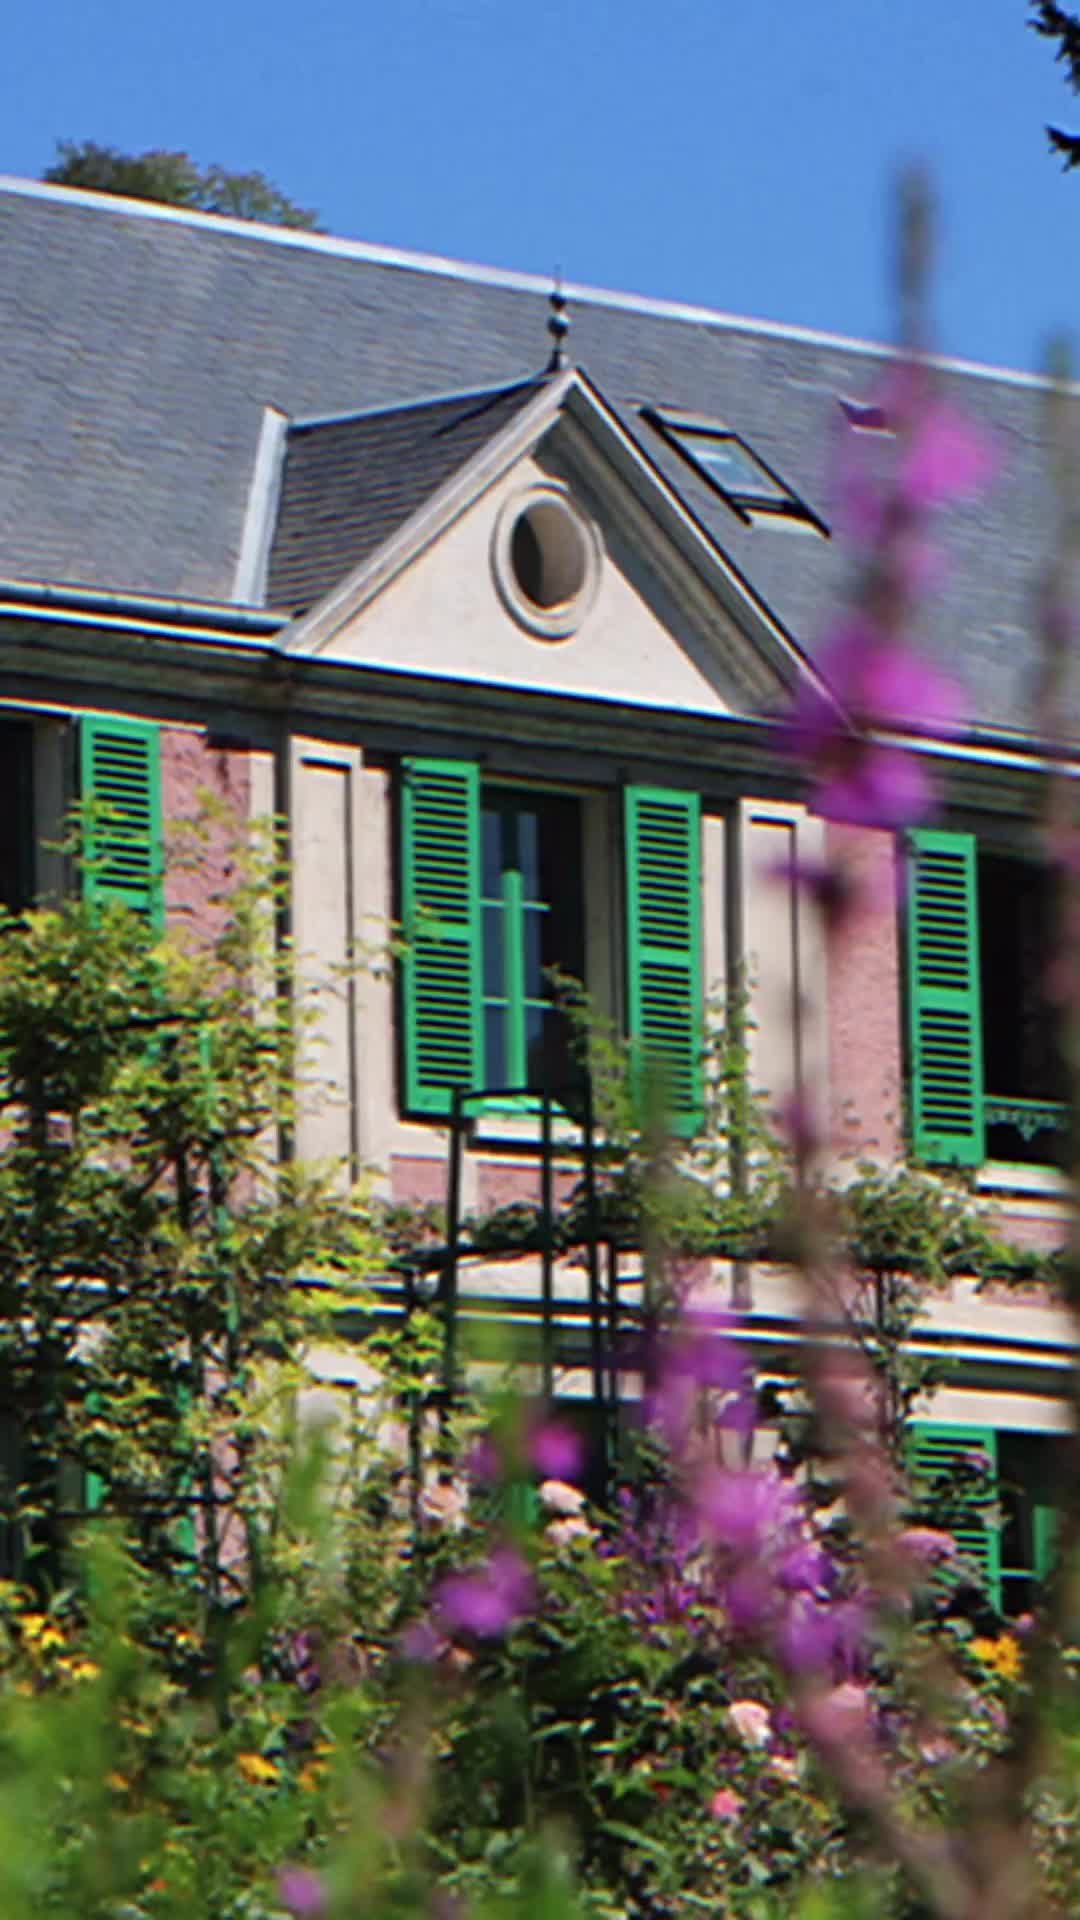 Discover Giverny's Beauty with Monet's Inspiration